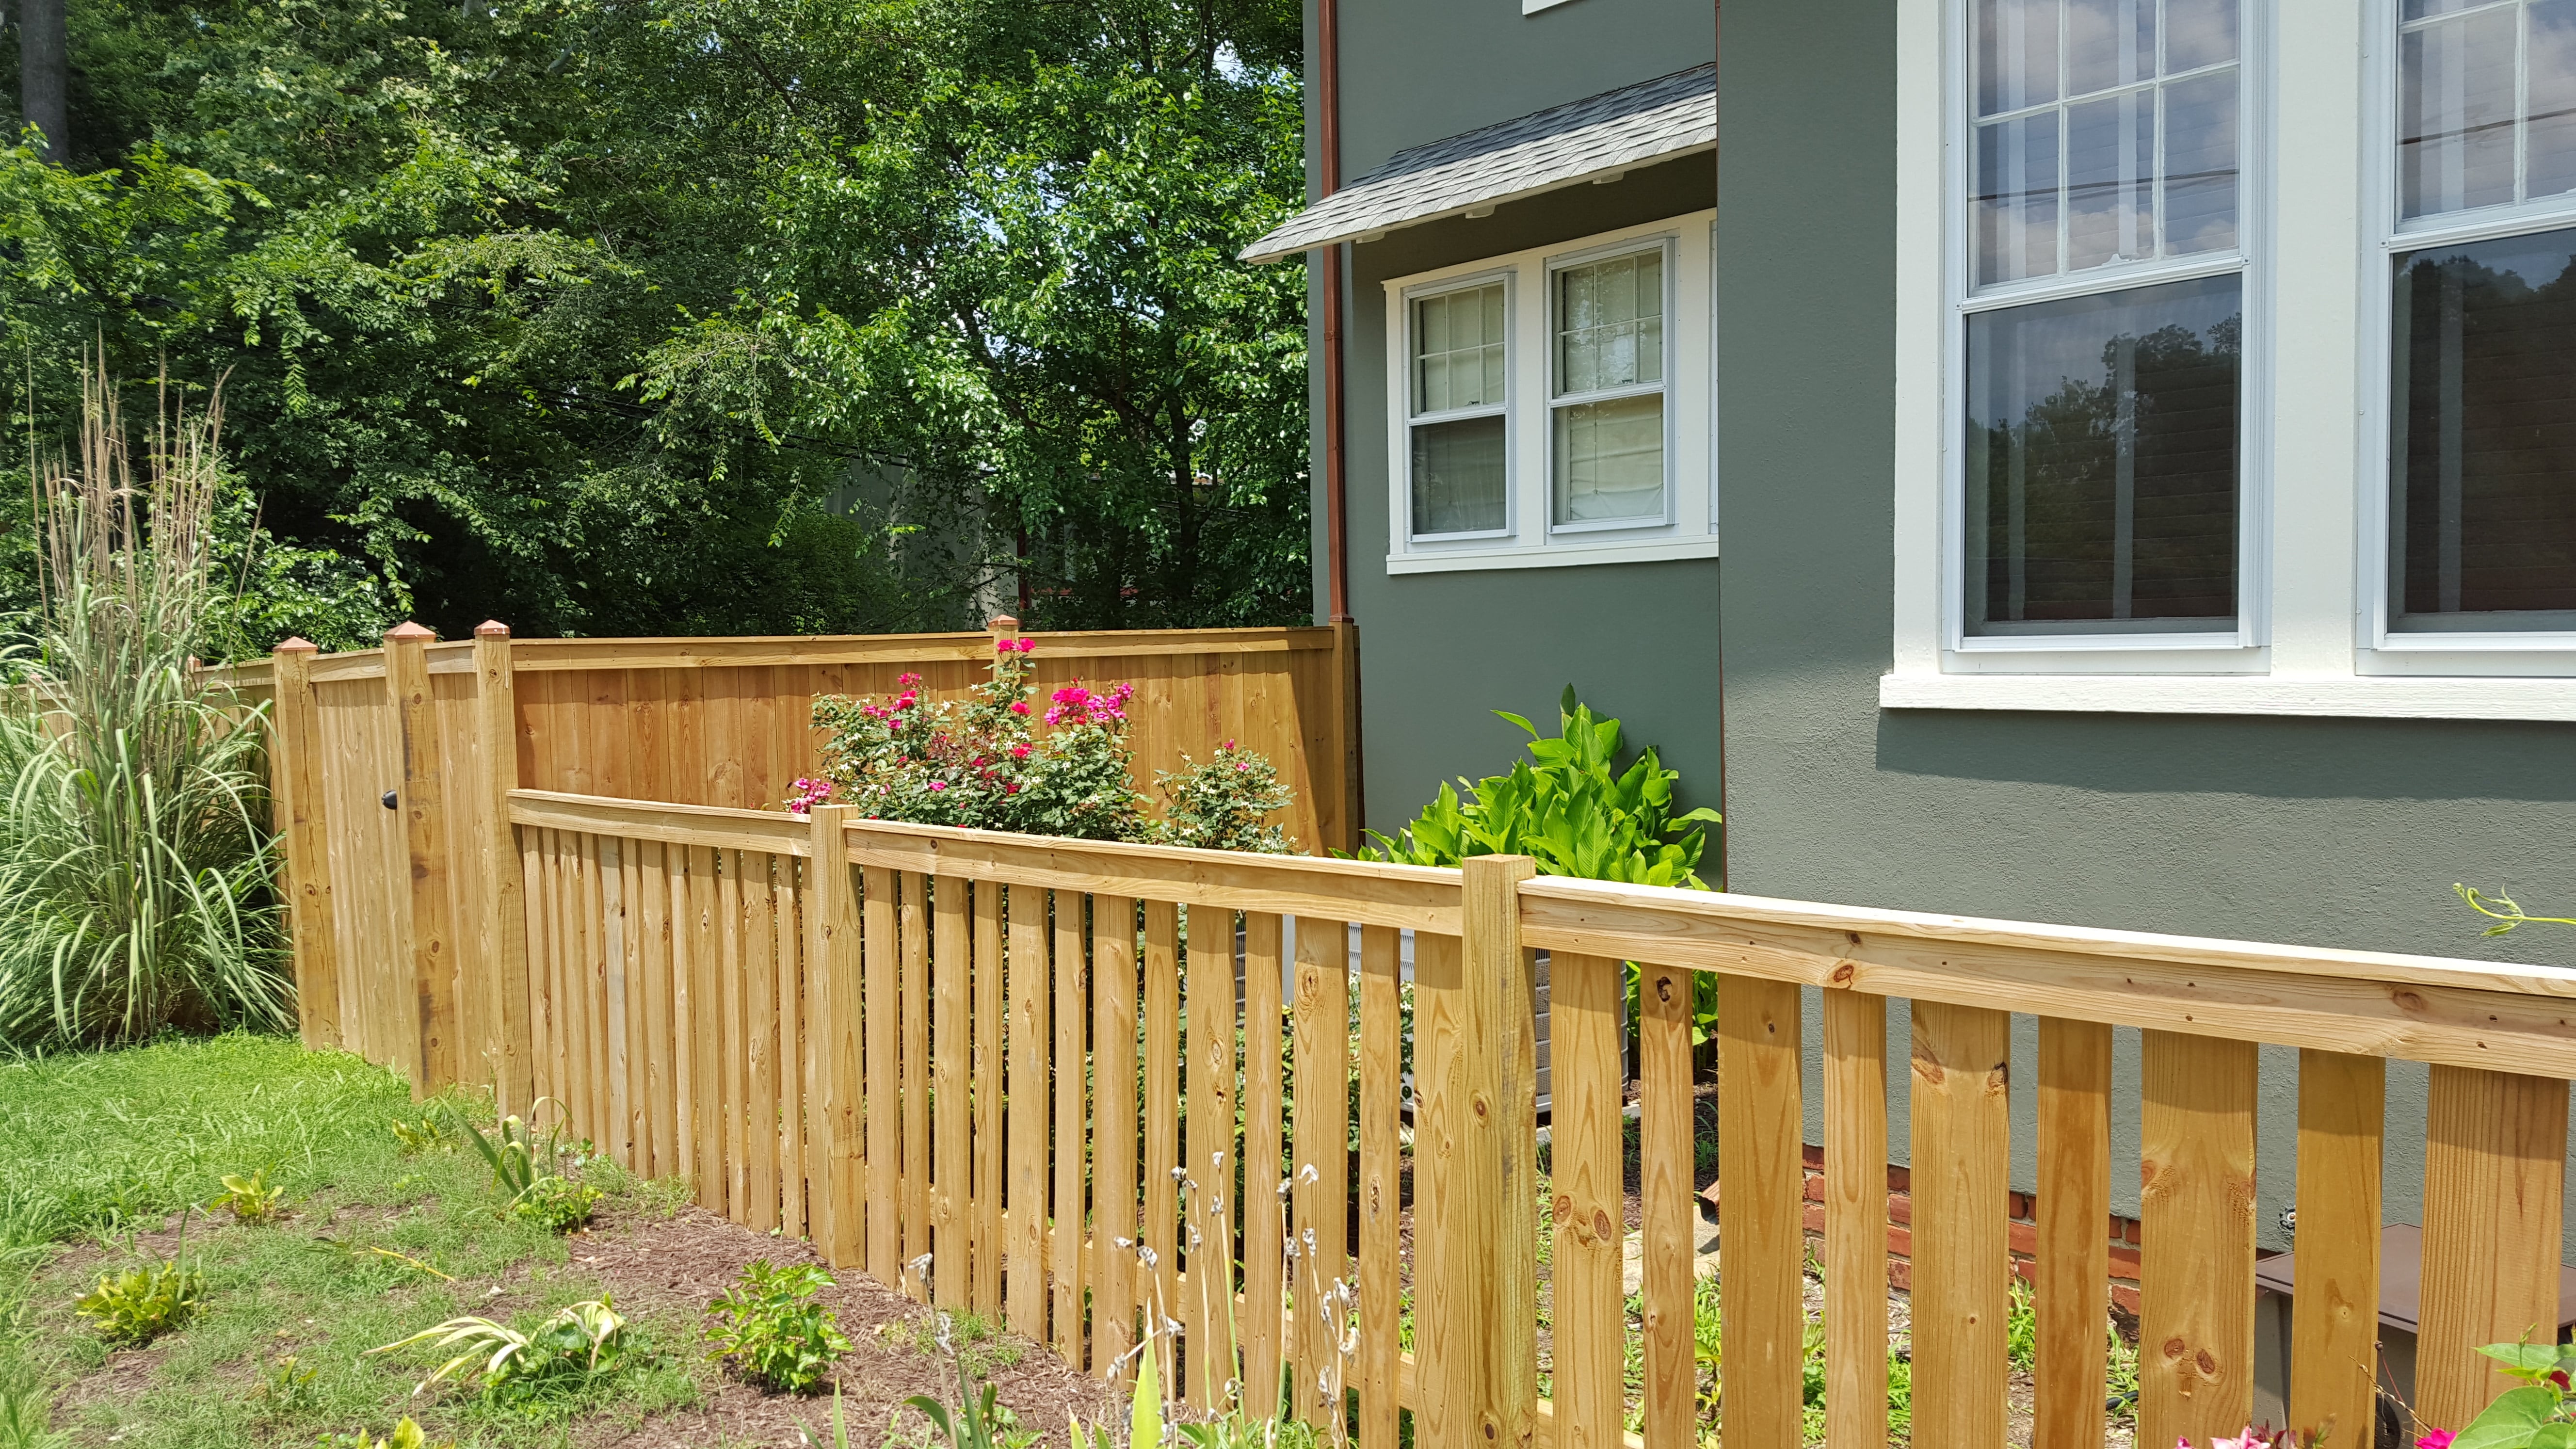 A beautiful custom alternating pickett wood fence adorns this recent renovation on Semmes avenue in Richmond's Forest Hill district.